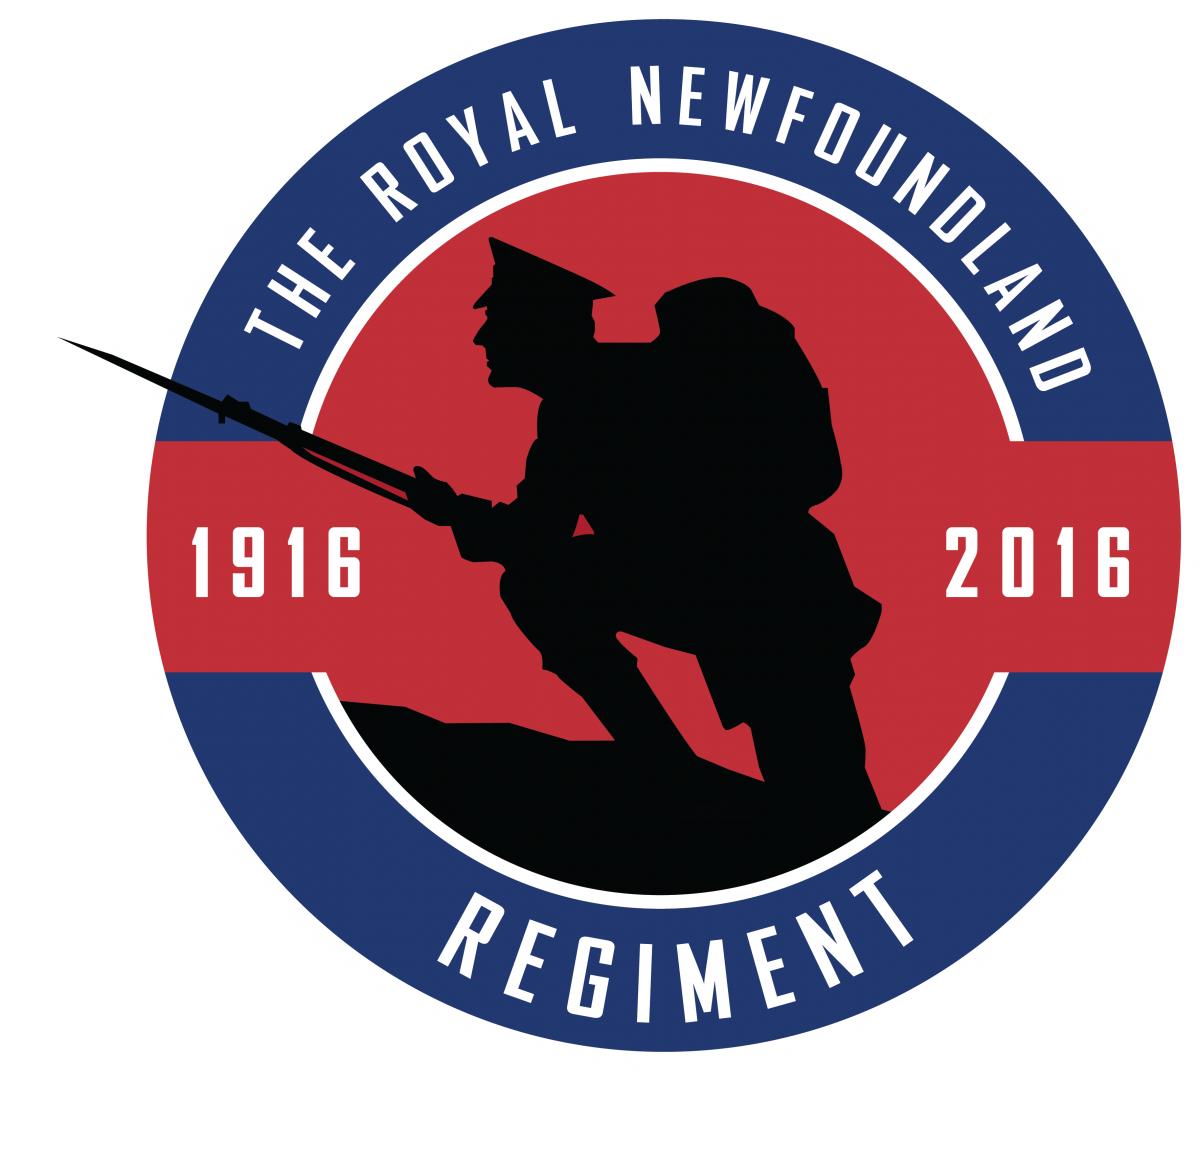 May 2019 – The Royal Newfoundland Regiment Museum